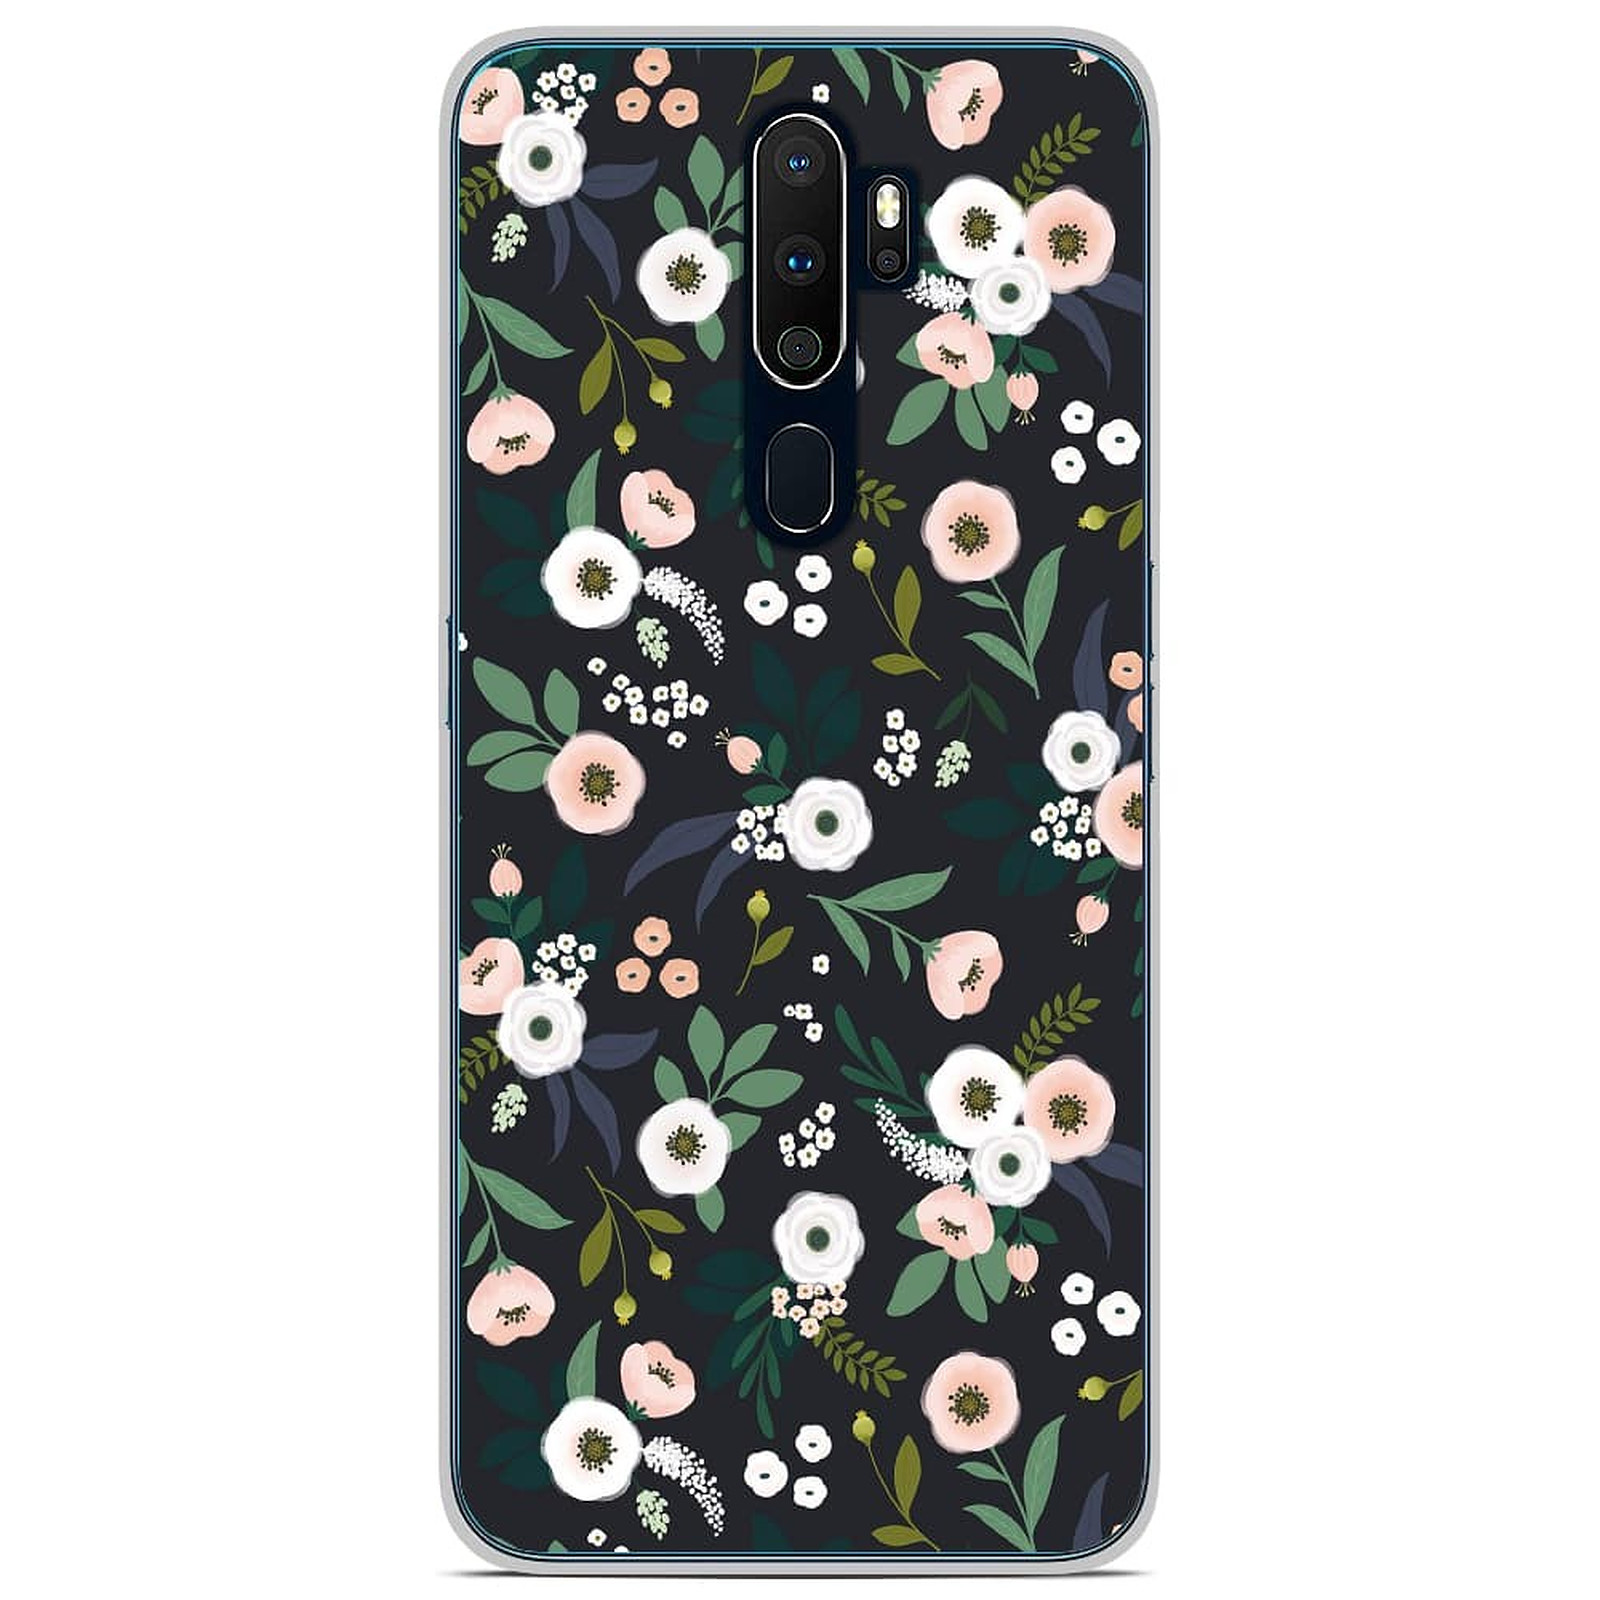 1001 Coques Coque silicone gel Oppo A5 2020 motif Flowers Noir - Coque telephone 1001Coques